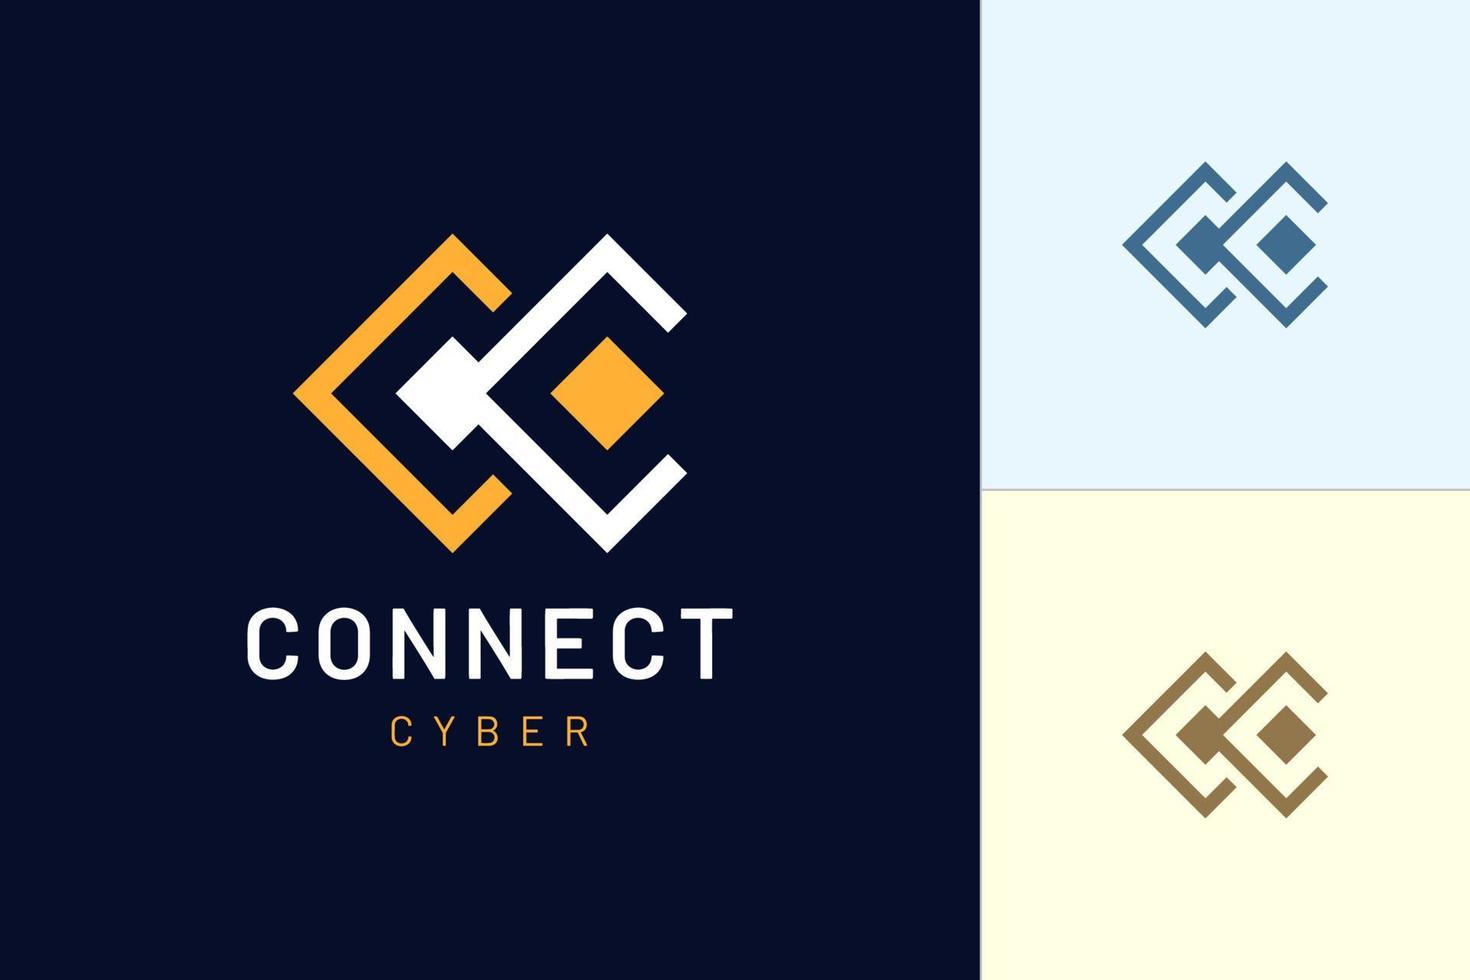 Letter C modern Logo template represents connection and digital for the tech industry vector